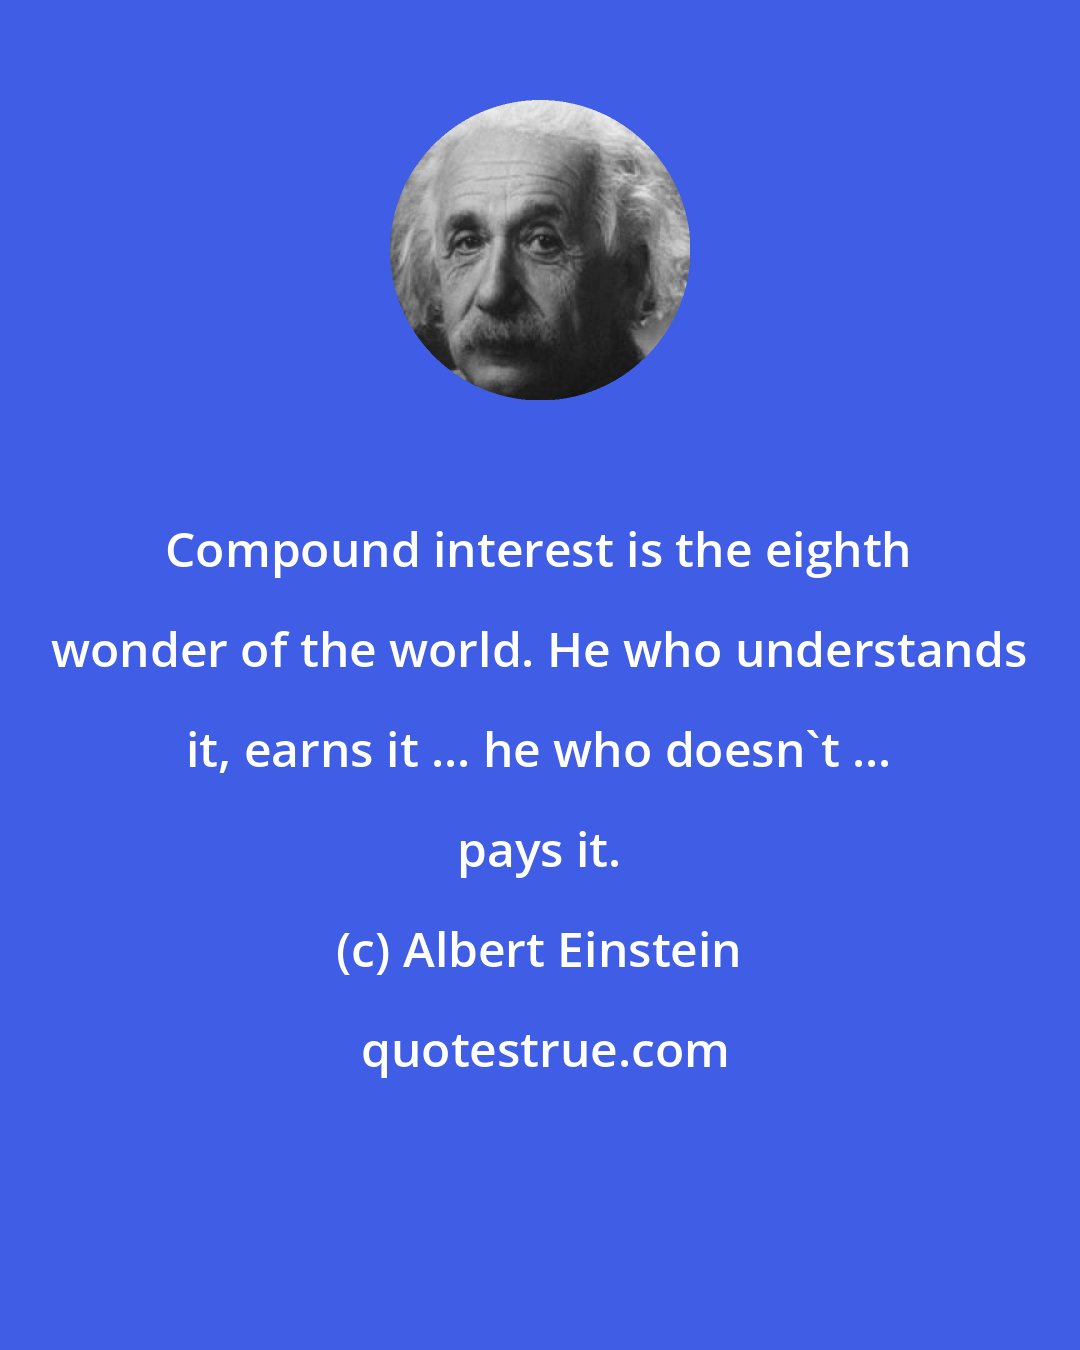 Albert Einstein: Compound interest is the eighth wonder of the world. He who understands it, earns it ... he who doesn't ... pays it.